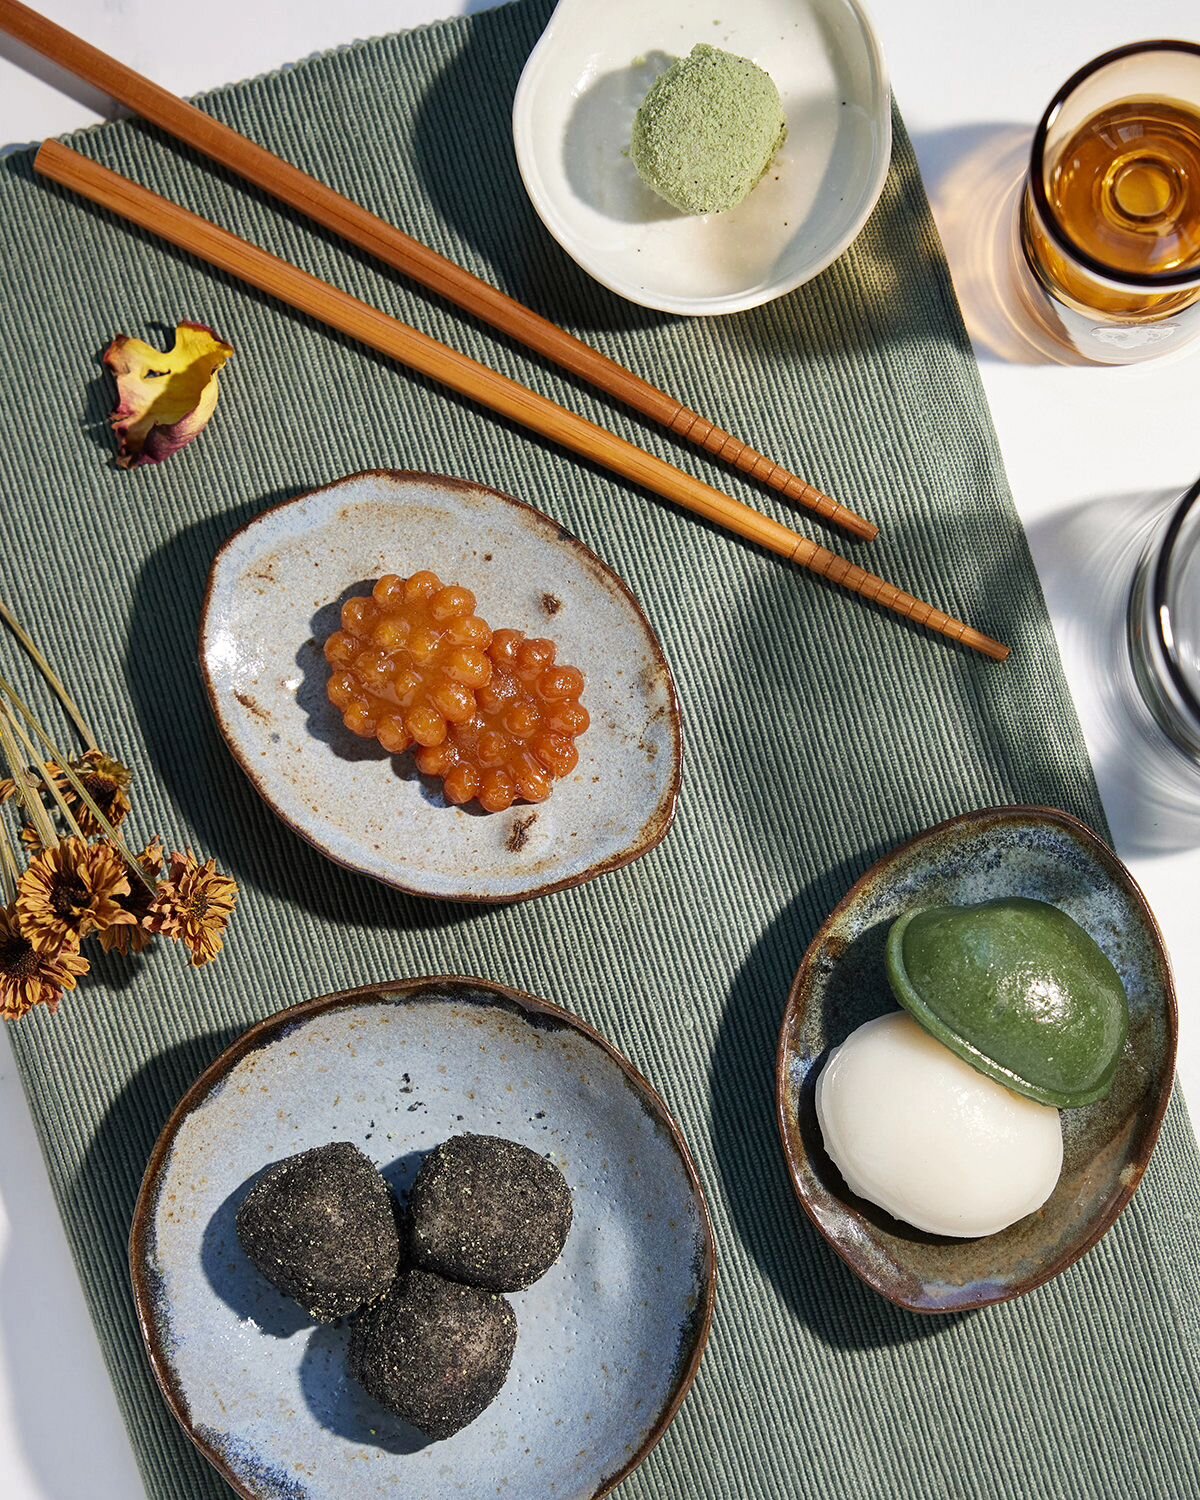 Happy Lunar New Year! 🎉 

A Picnic with a few Korean staple desserts

Kyung Dan
Korean rice cake balls

Yakgwa
Deep fried wheat-based hwagwa (types of Korean confections) dipped in honey and ginger juice (my fav!!)

Baram Tteok
Translating to Wind (